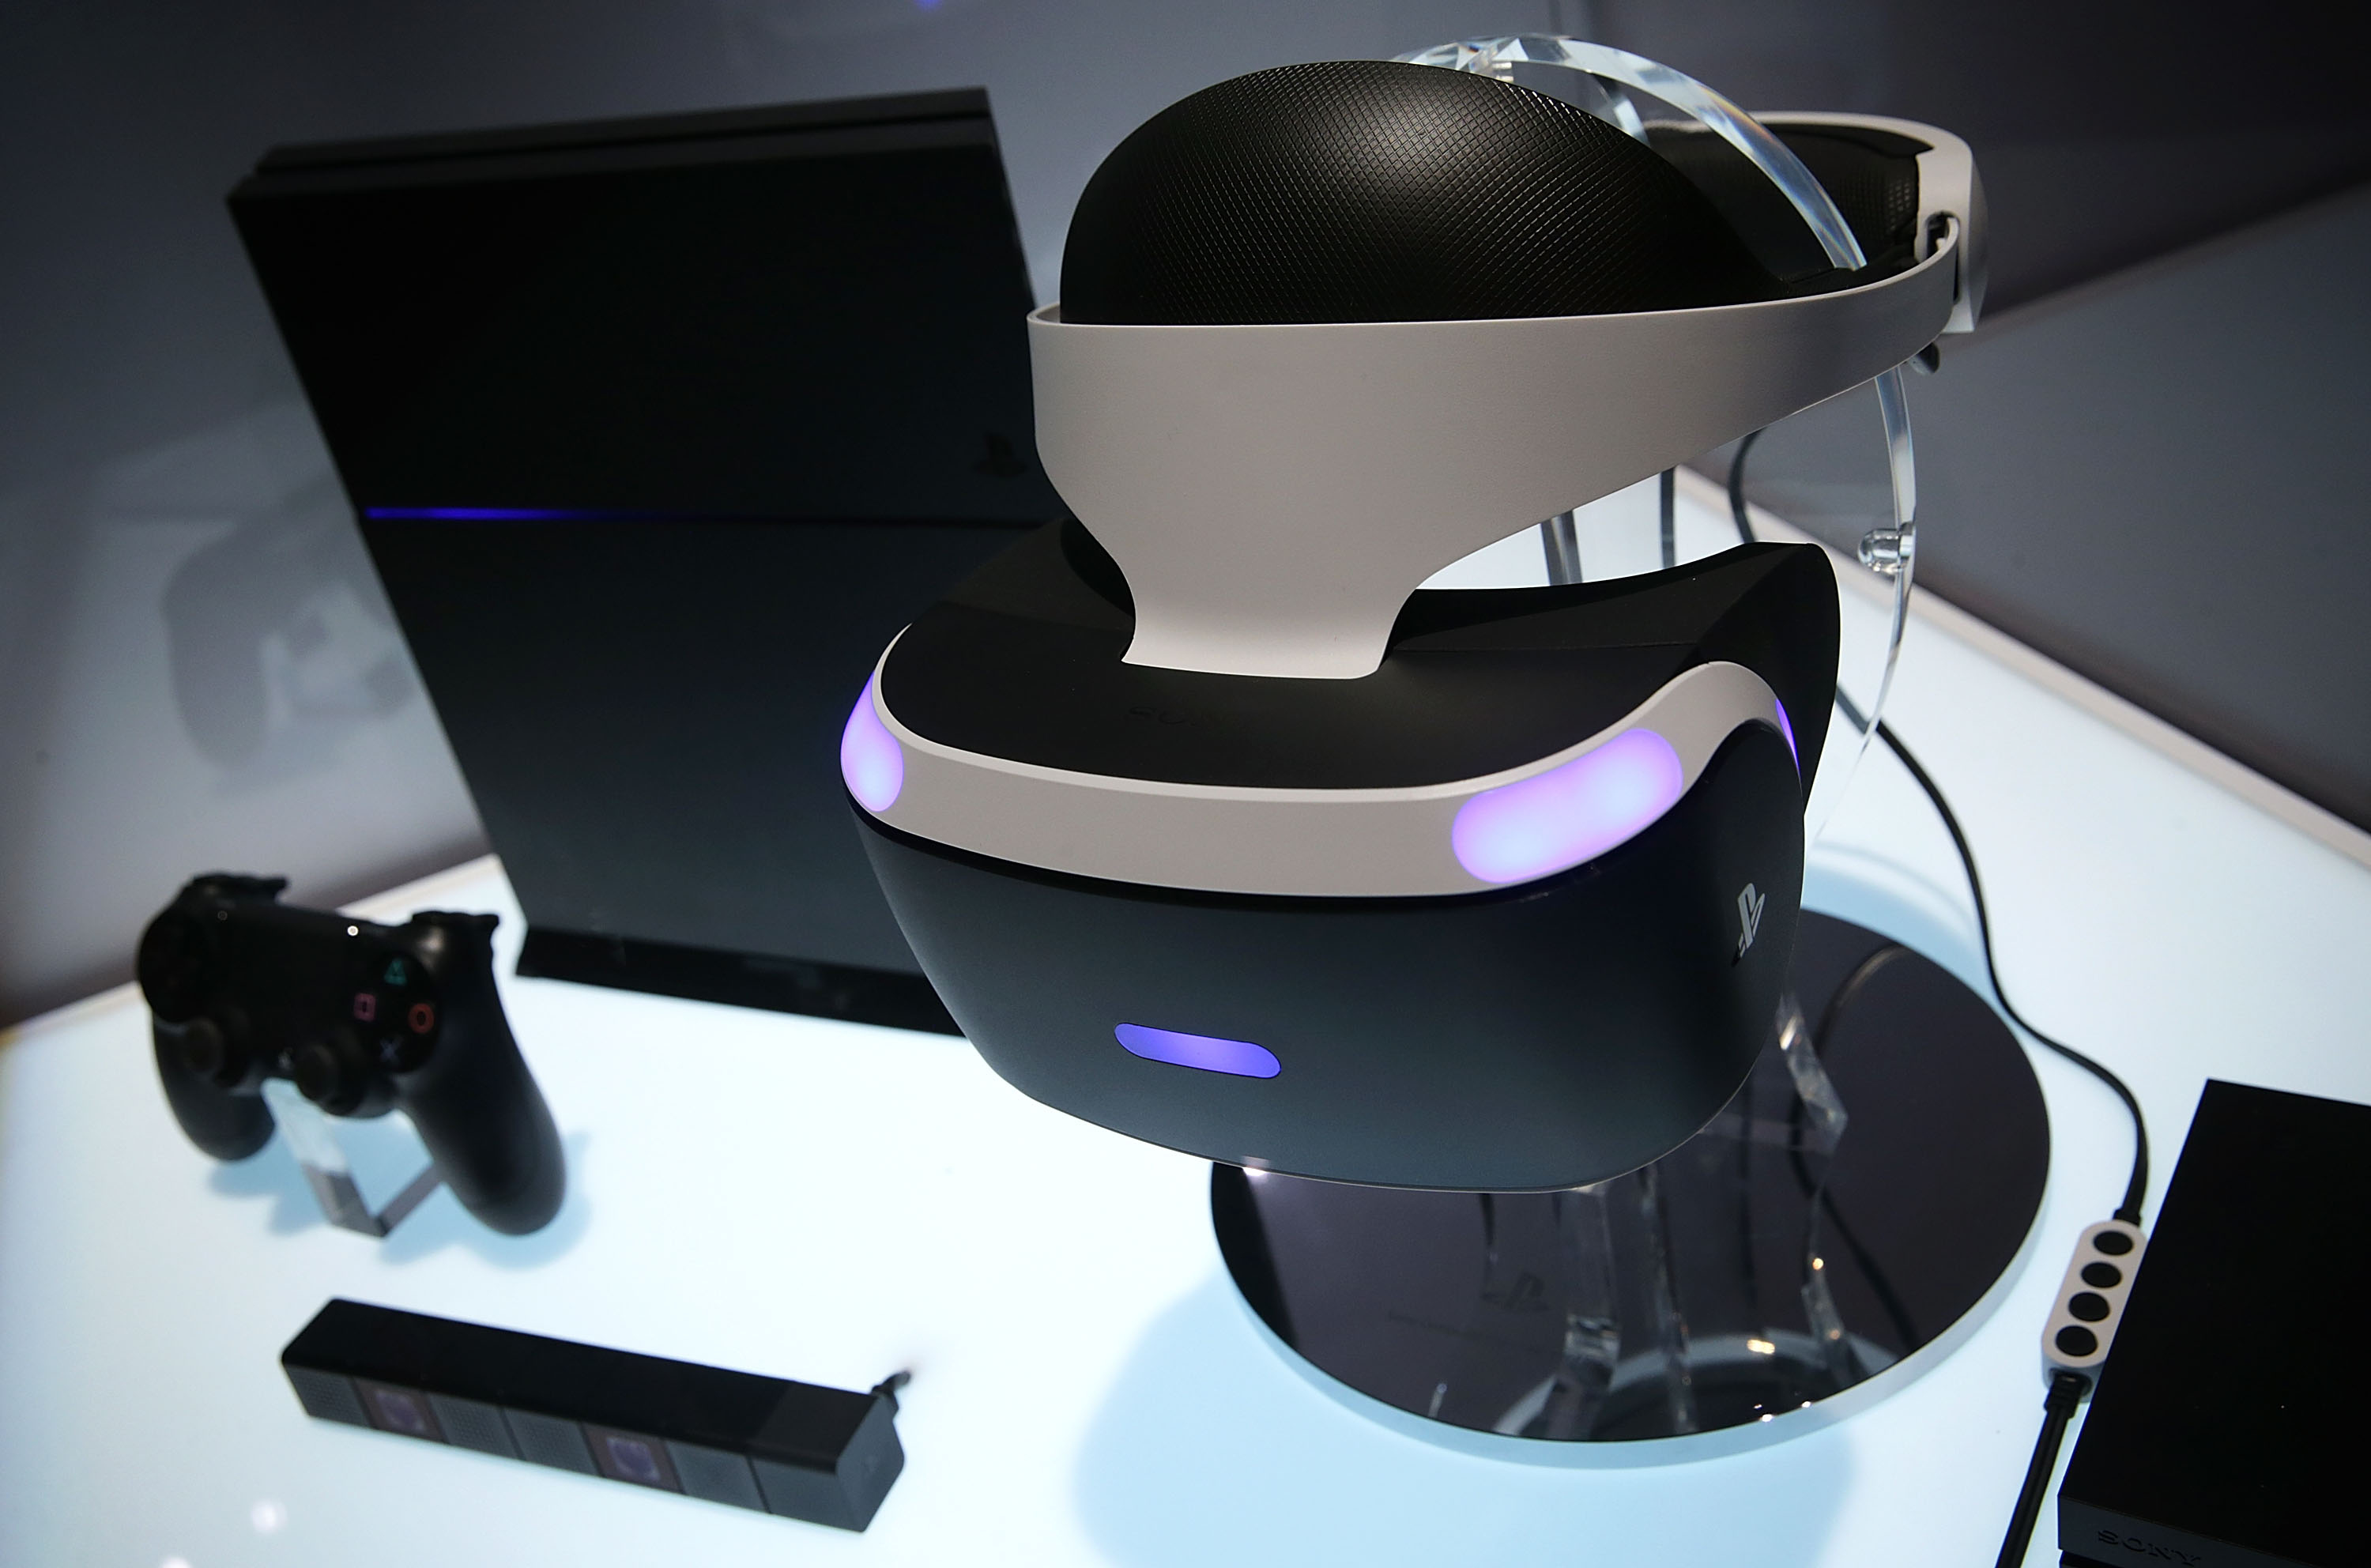 LAS VEGAS, NV - JANUARY 05: A reference model of the Sony PlayStation VR viewer is on display with a PlayStation 4 System during a press event for CES 2016 at the Mandalay Bay Convention Center on January 5, 2016 in Las Vegas, Nevada. CES, the world's largest annual consumer technology trade show, runs from January 6-9 and is expected to feature 3,600 exhibitors showing off their latest products and services to more than 150,000 attendees.   Alex Wong/Getty Images/AFP